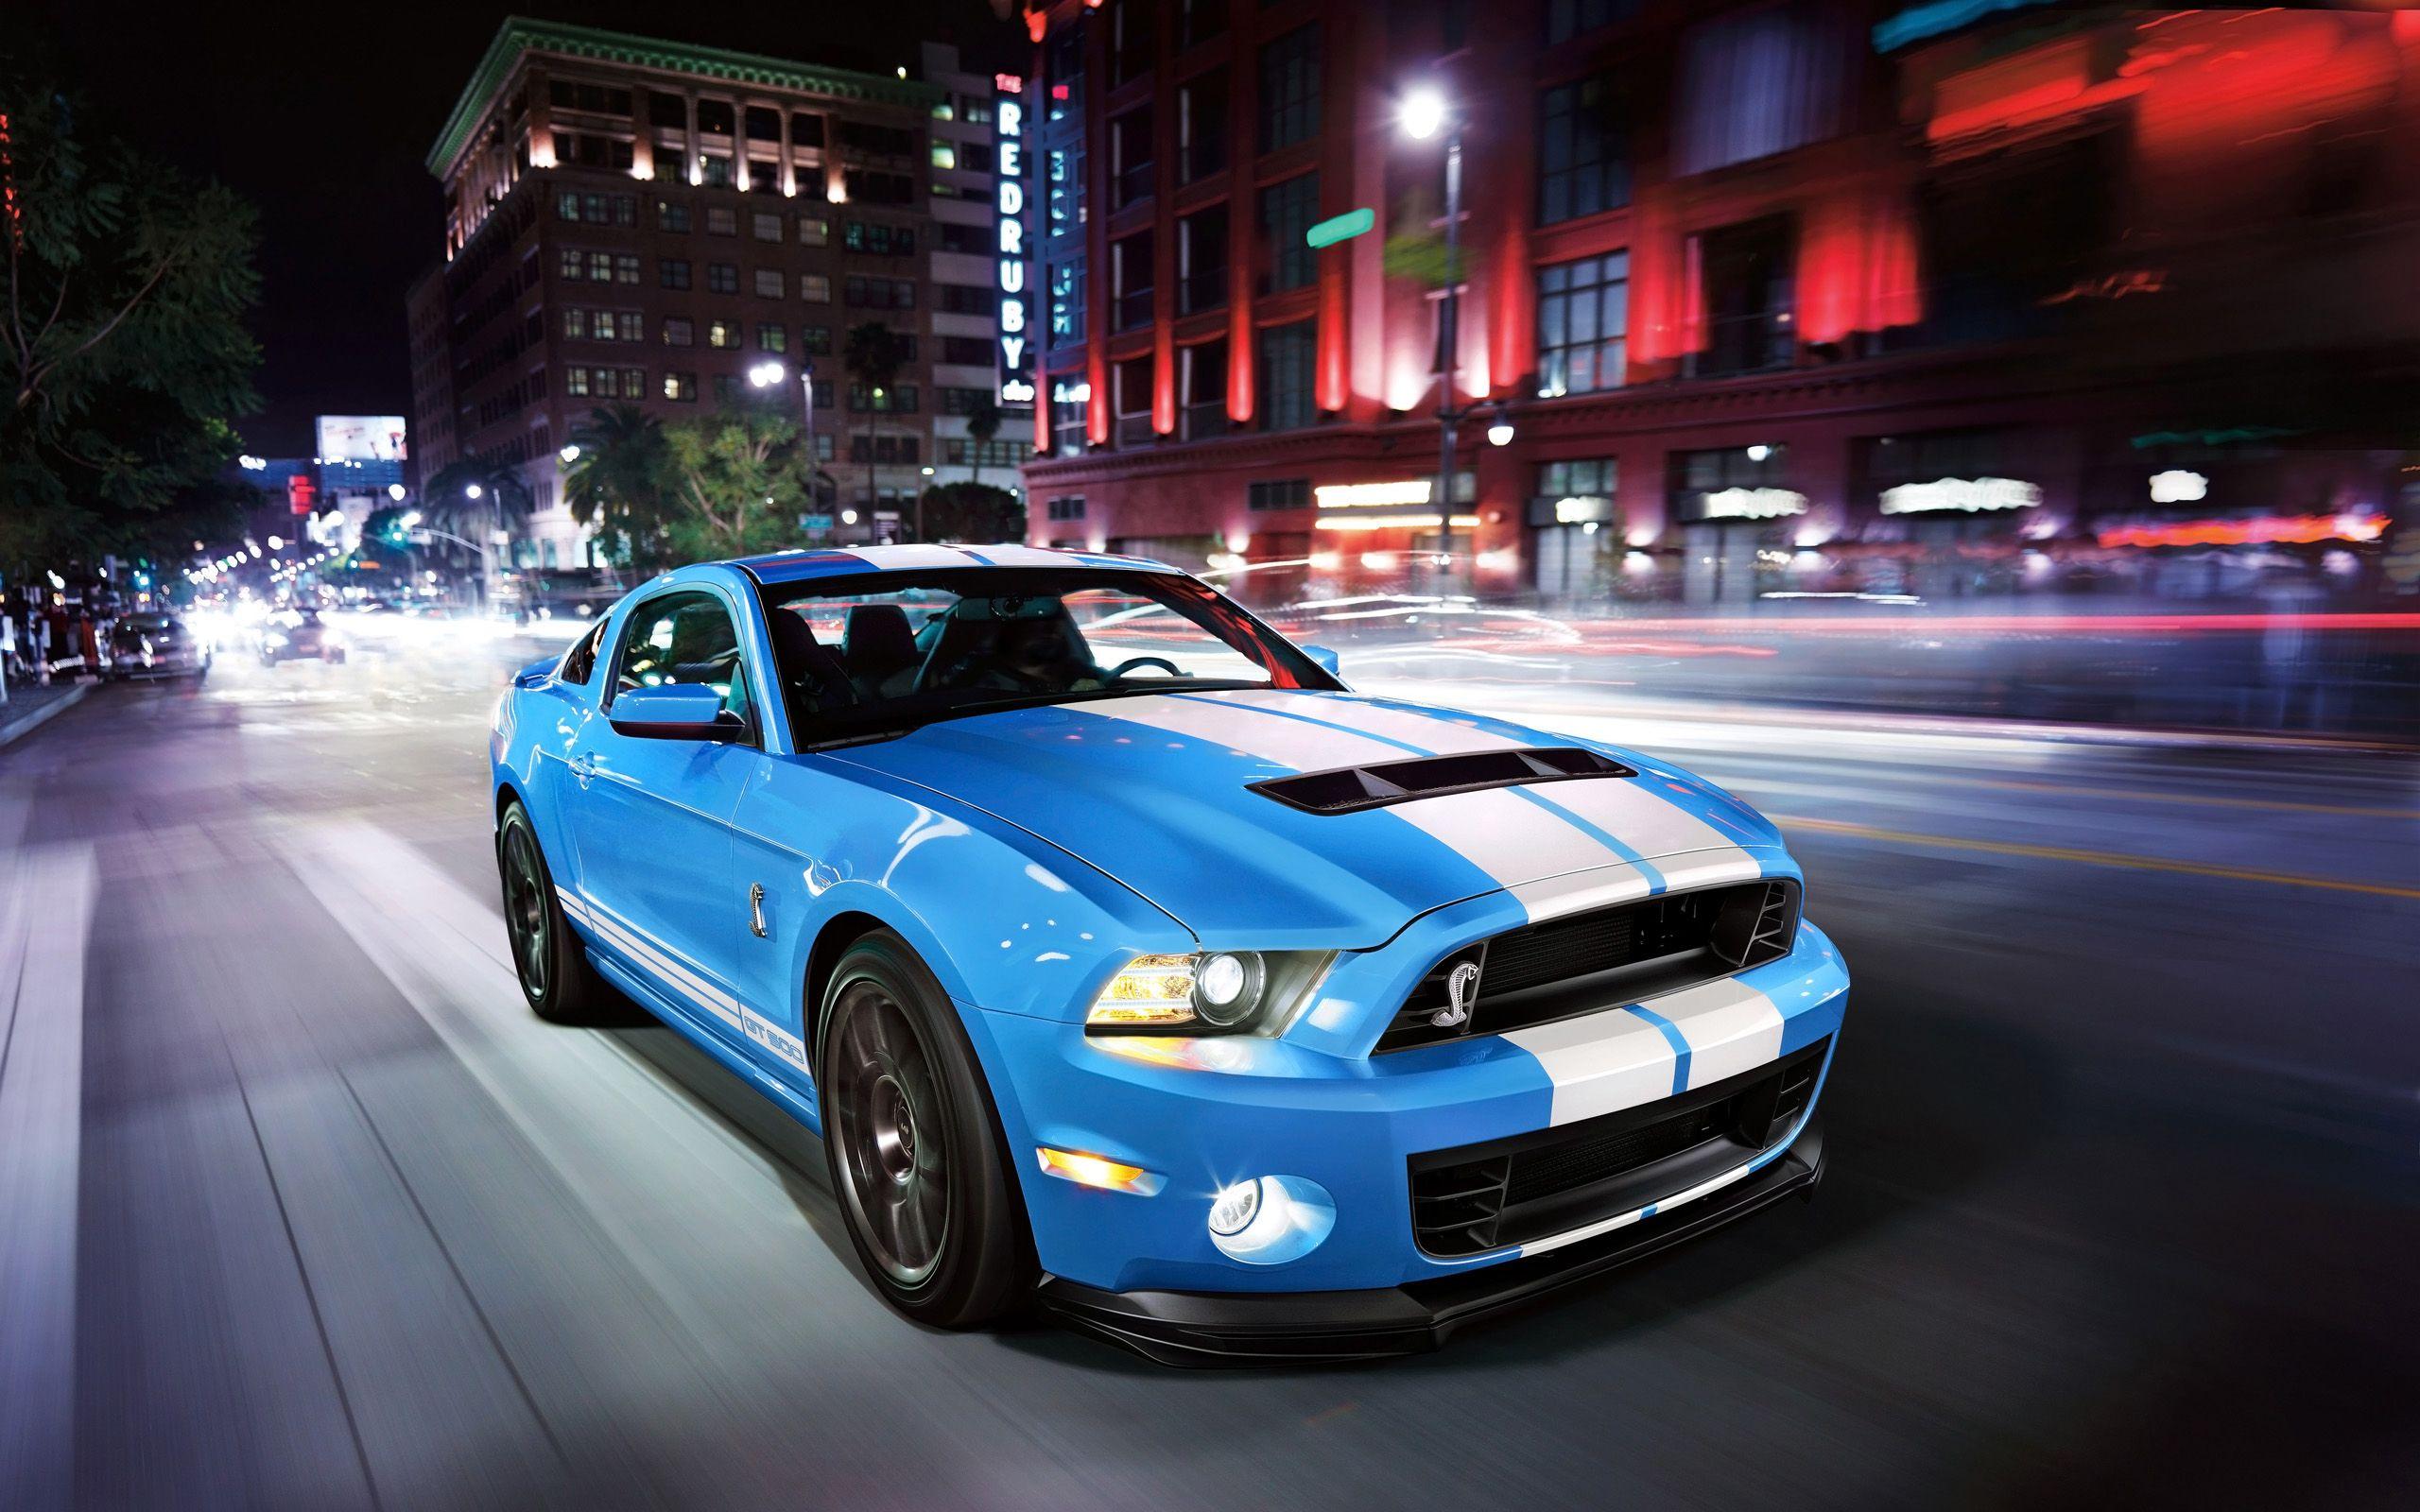 Ford Mustang Shelby GT500 Wallpaper, Picture, Image